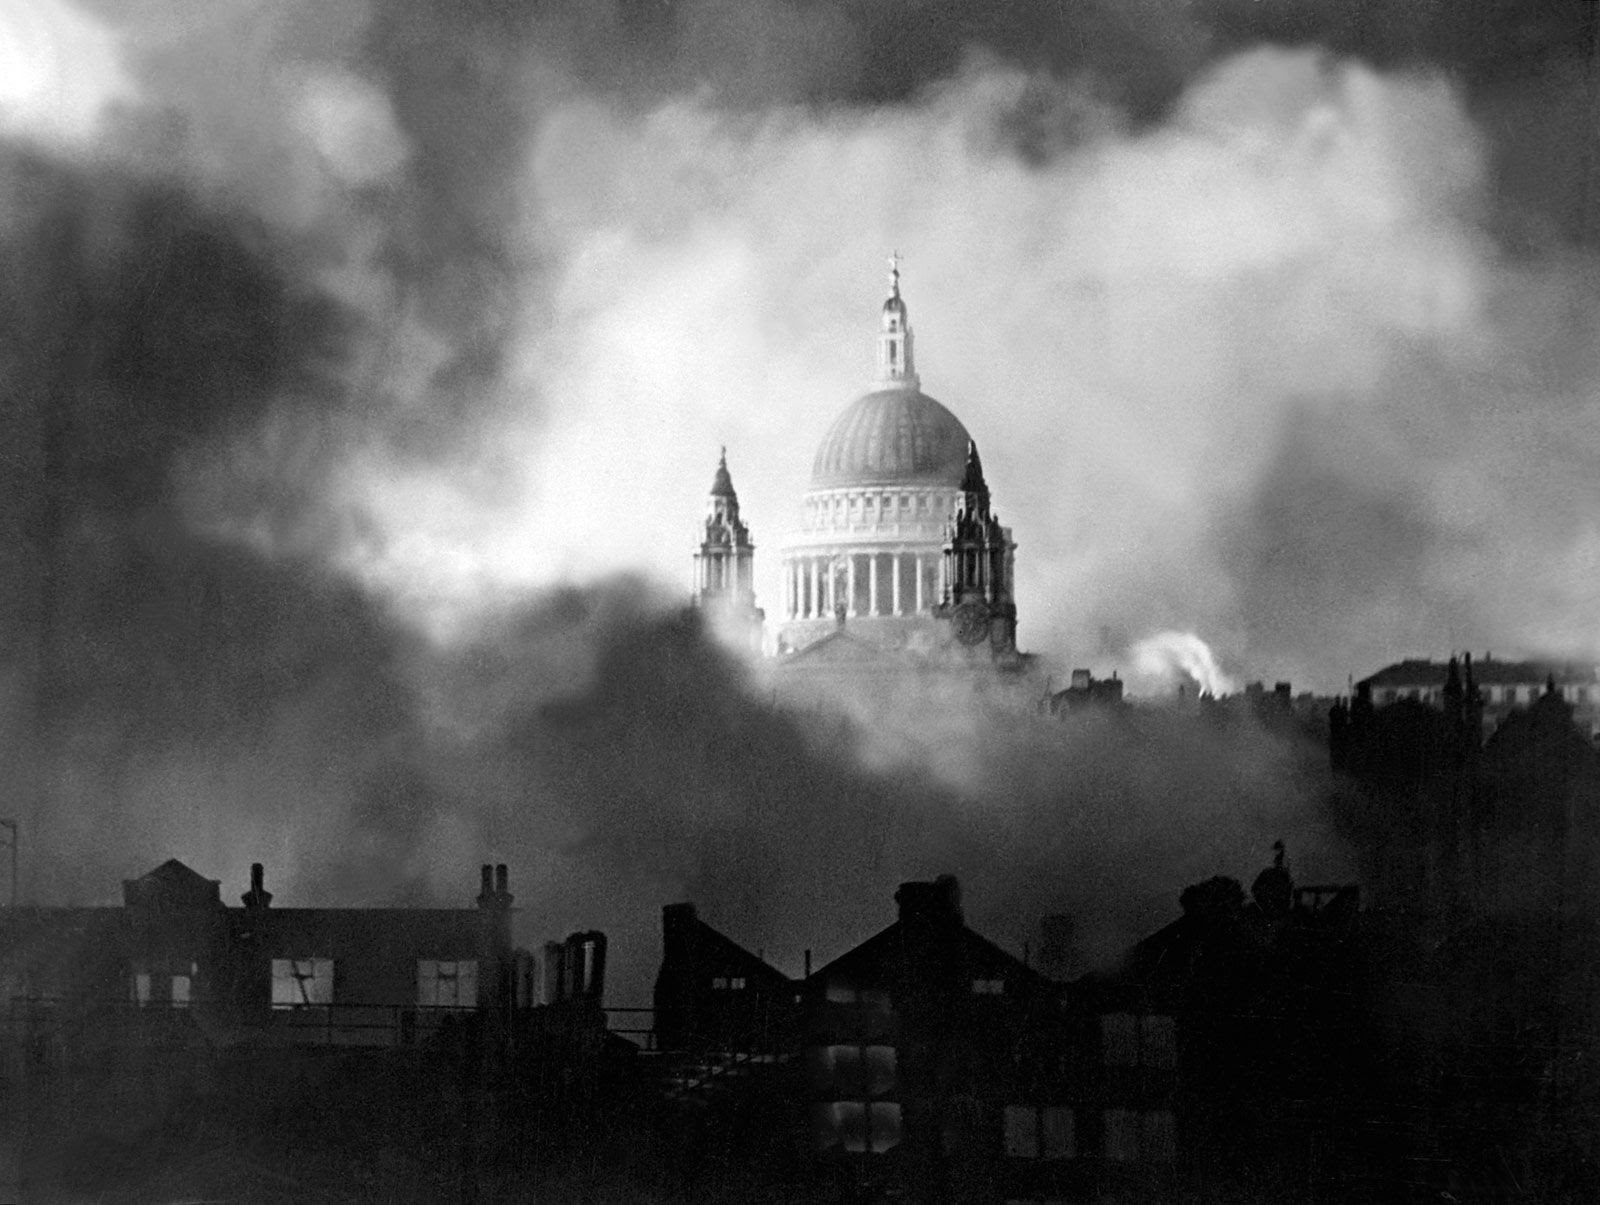 The day that 10,000 bombs rained down on London